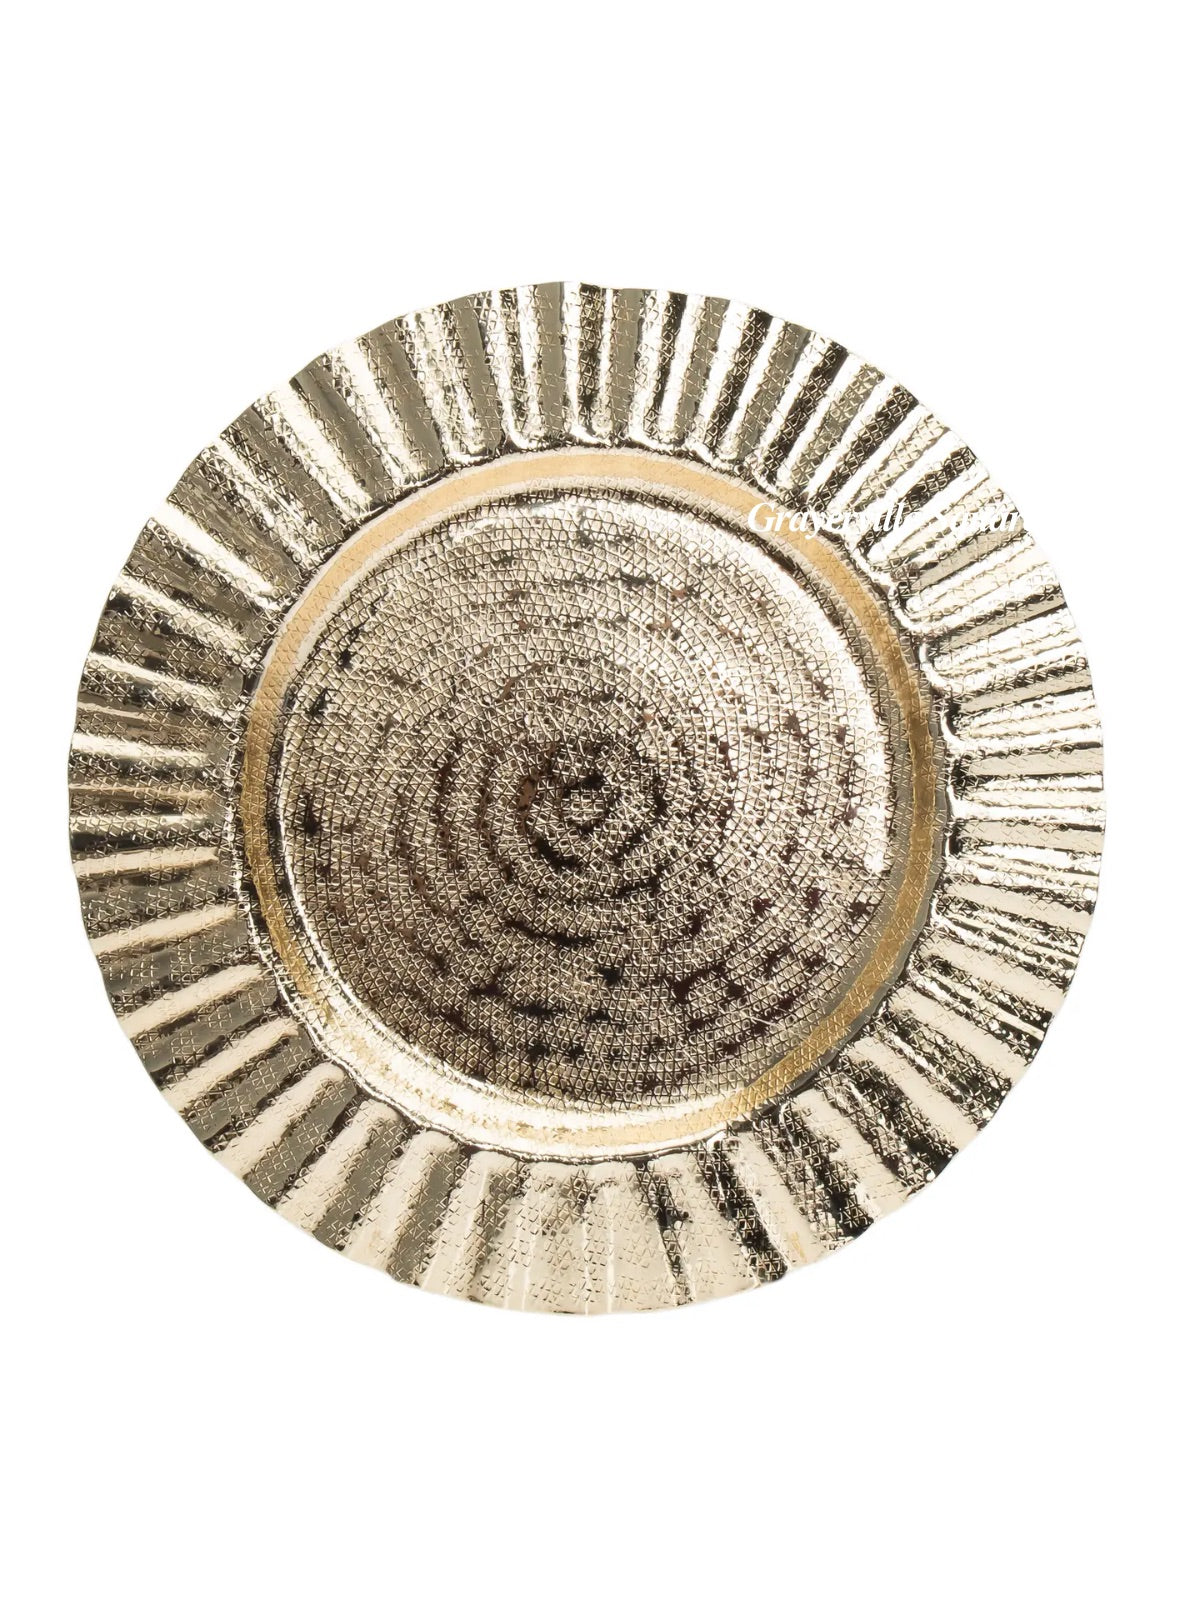 13D inches Stainless Steel Gold Ripple Charger Plate. Elevate dining with luxury, hand-washable elegance. Imported for unforgettable occasions.